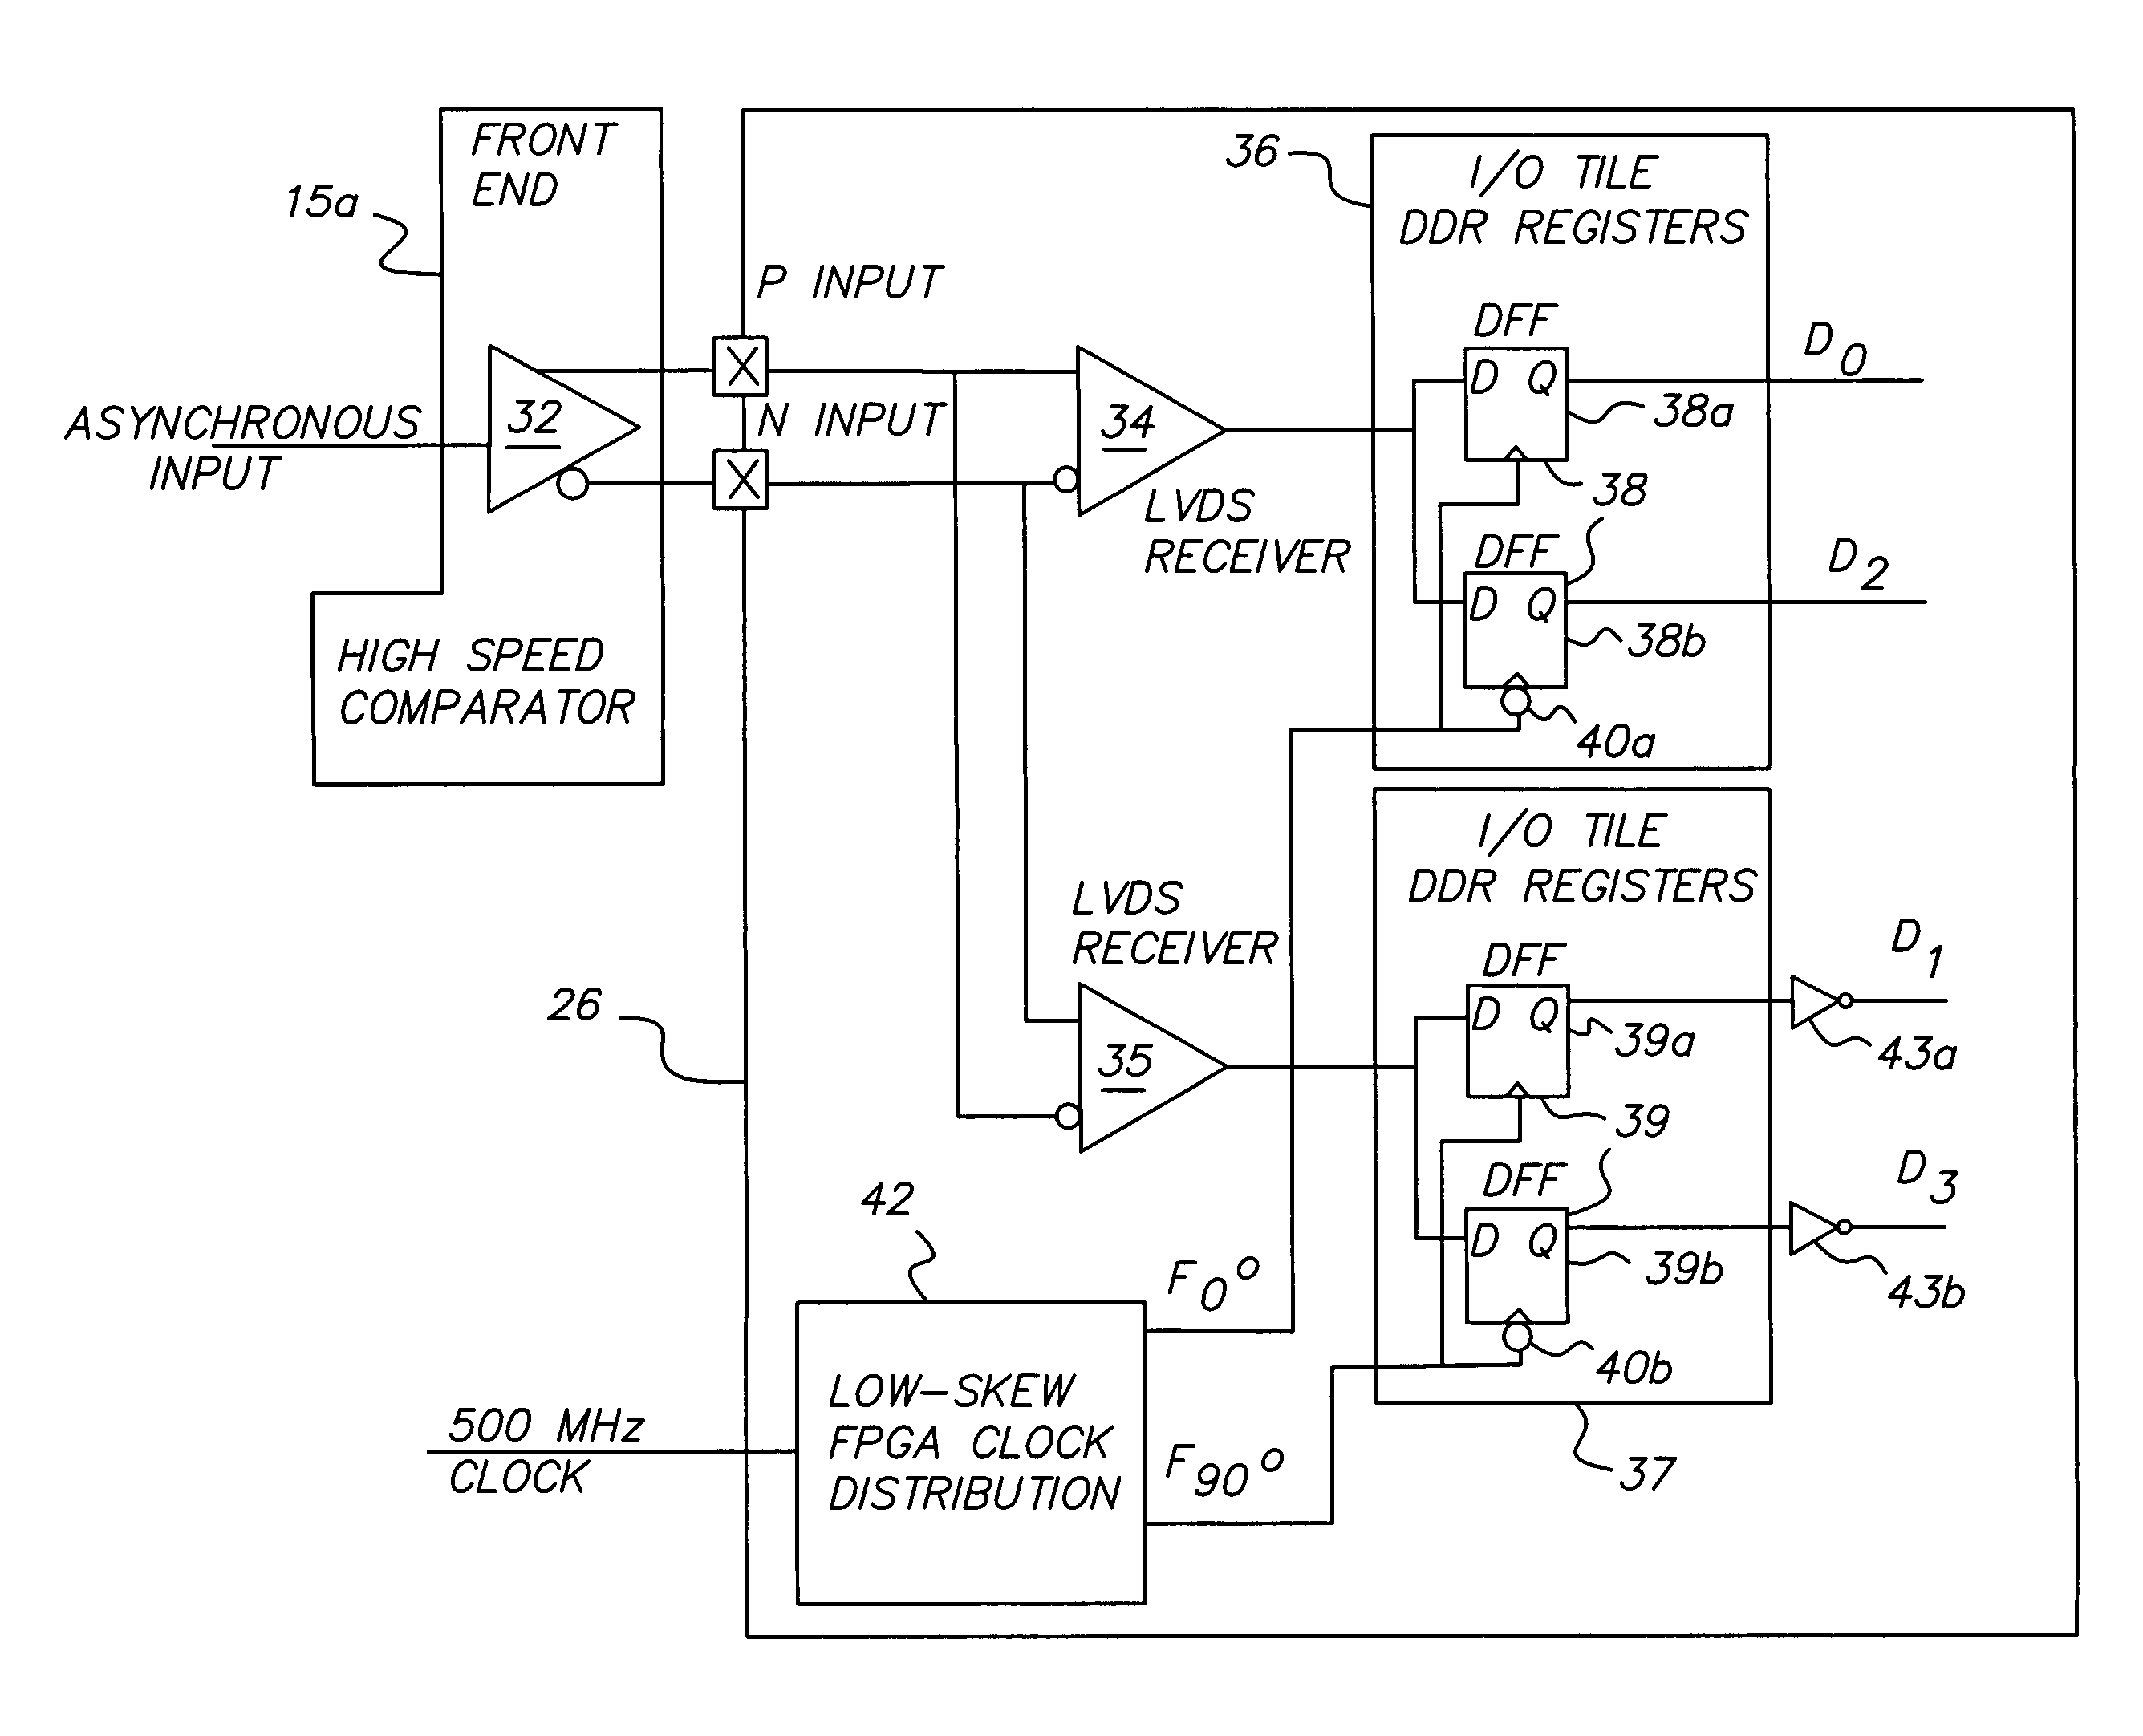 Data acquisition system for test and measurement signals